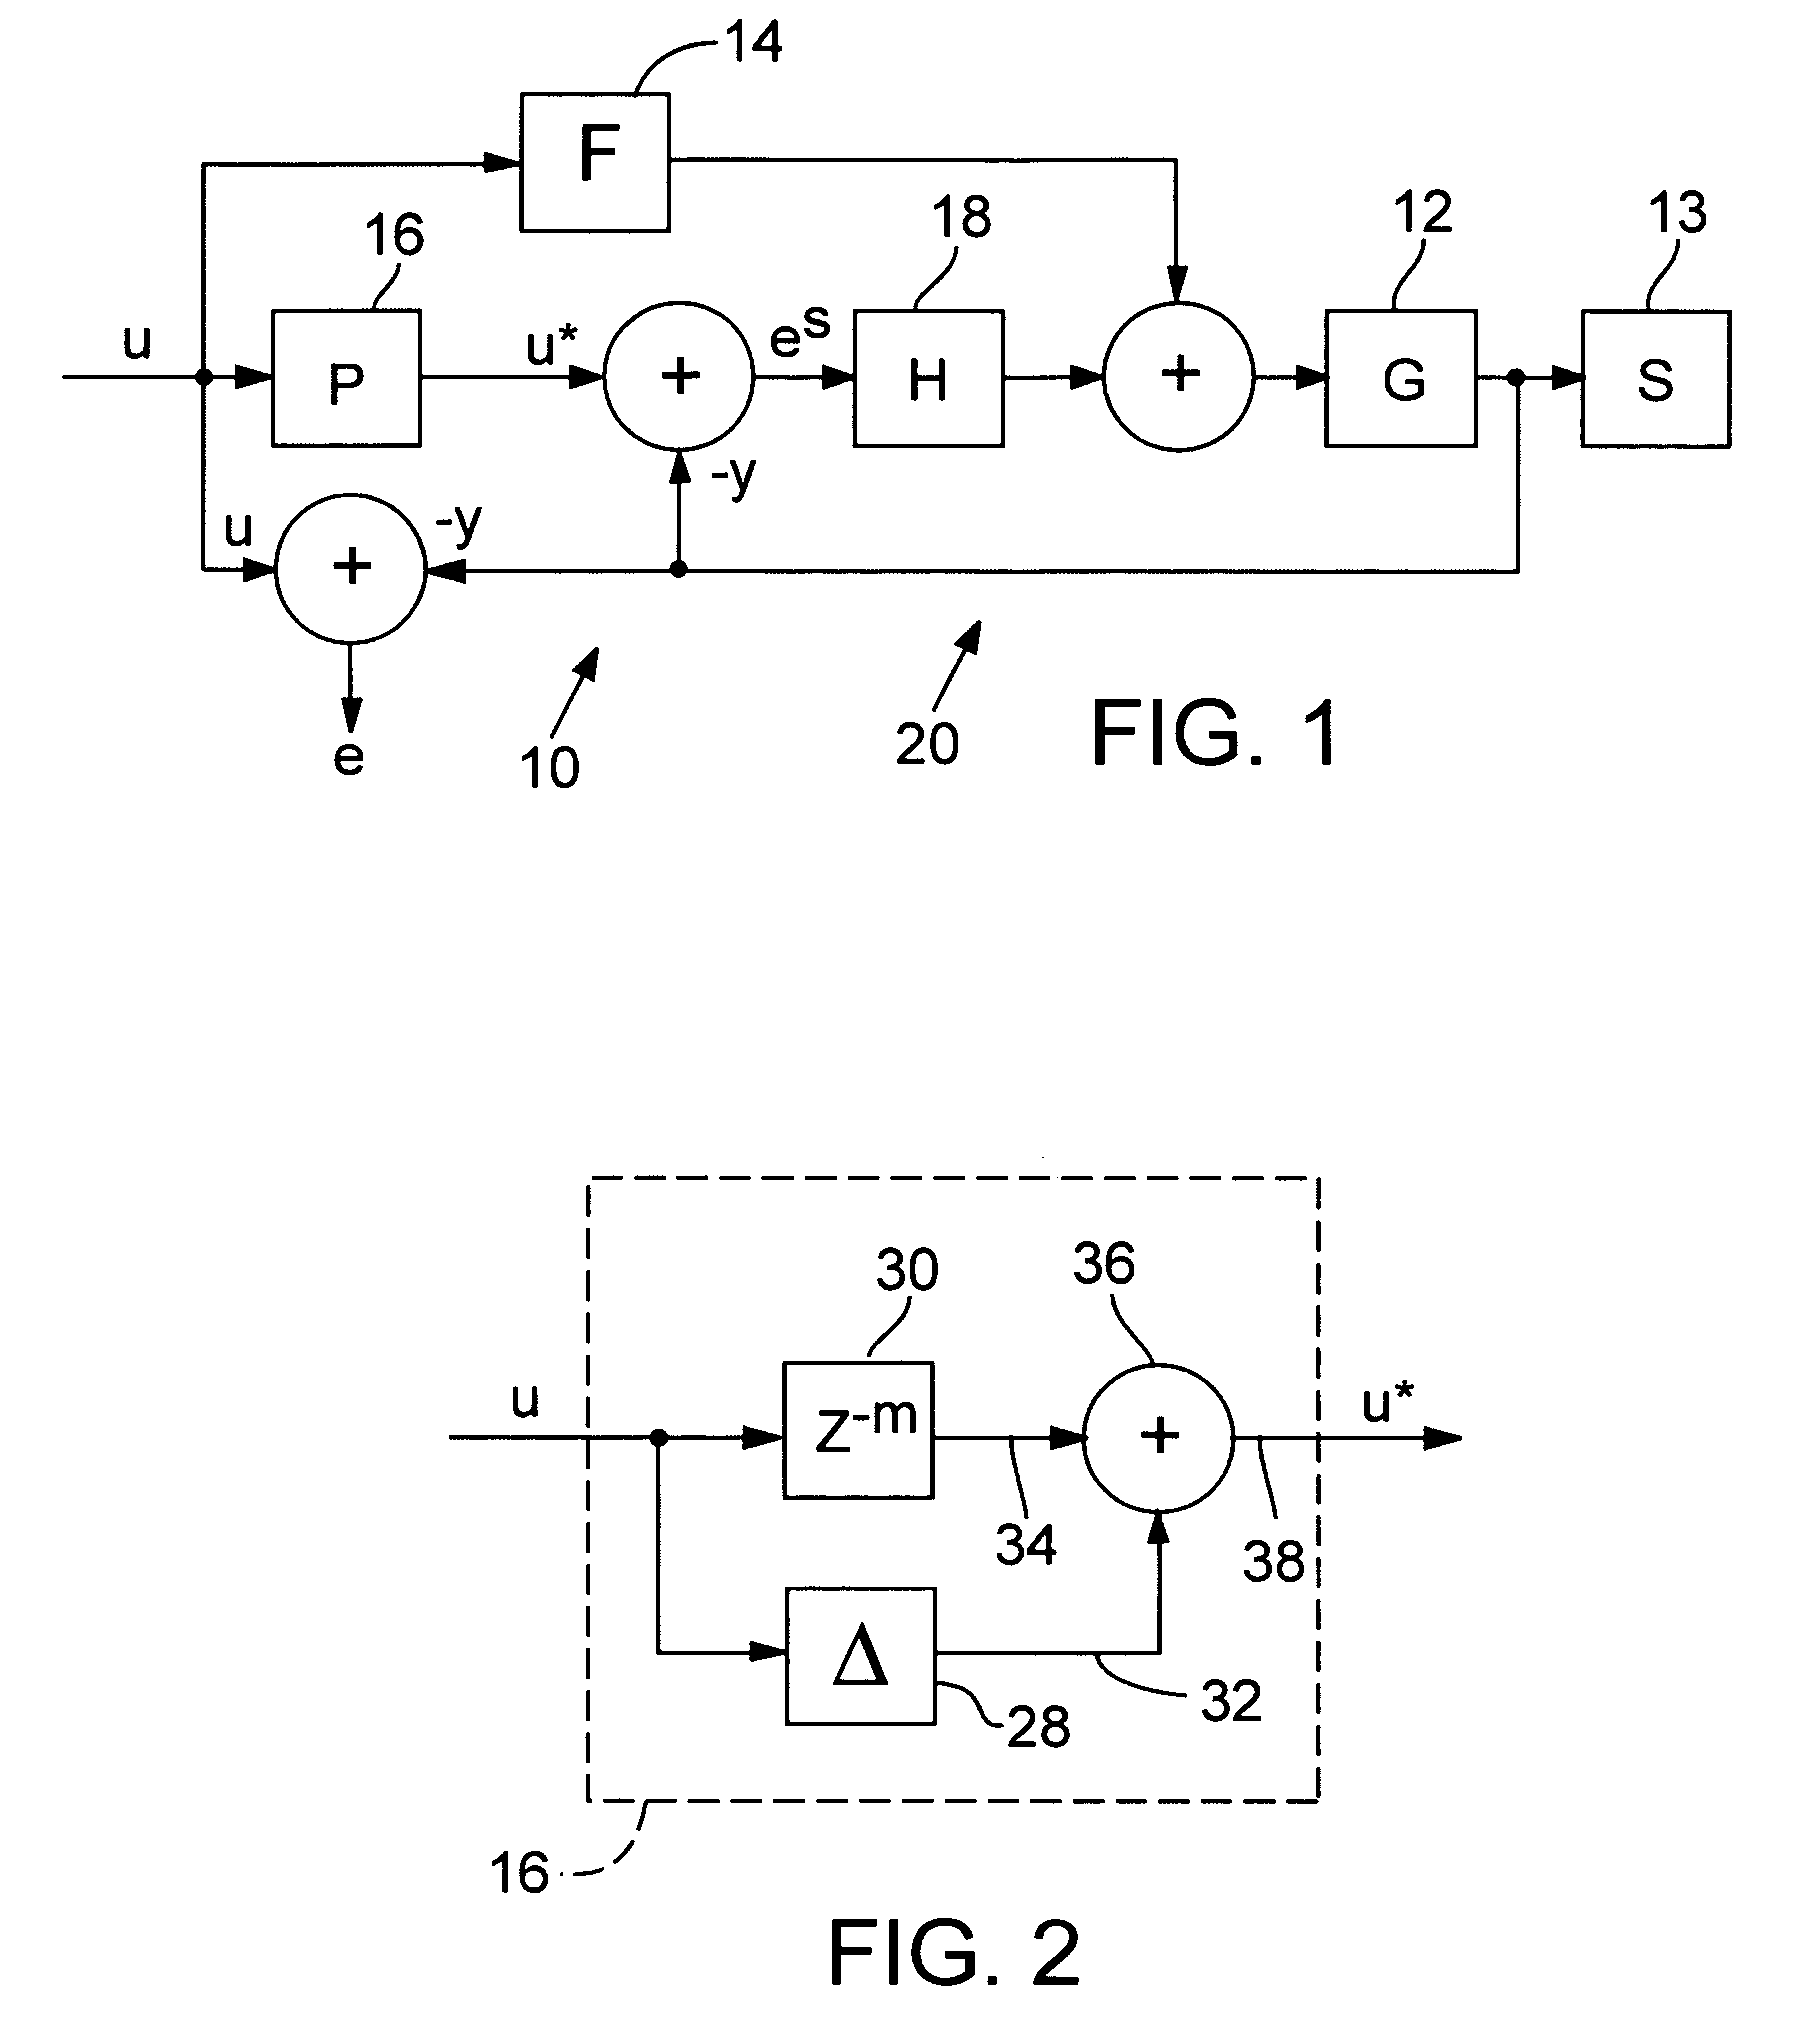 Adaptive command filtering for servomechanism control systems